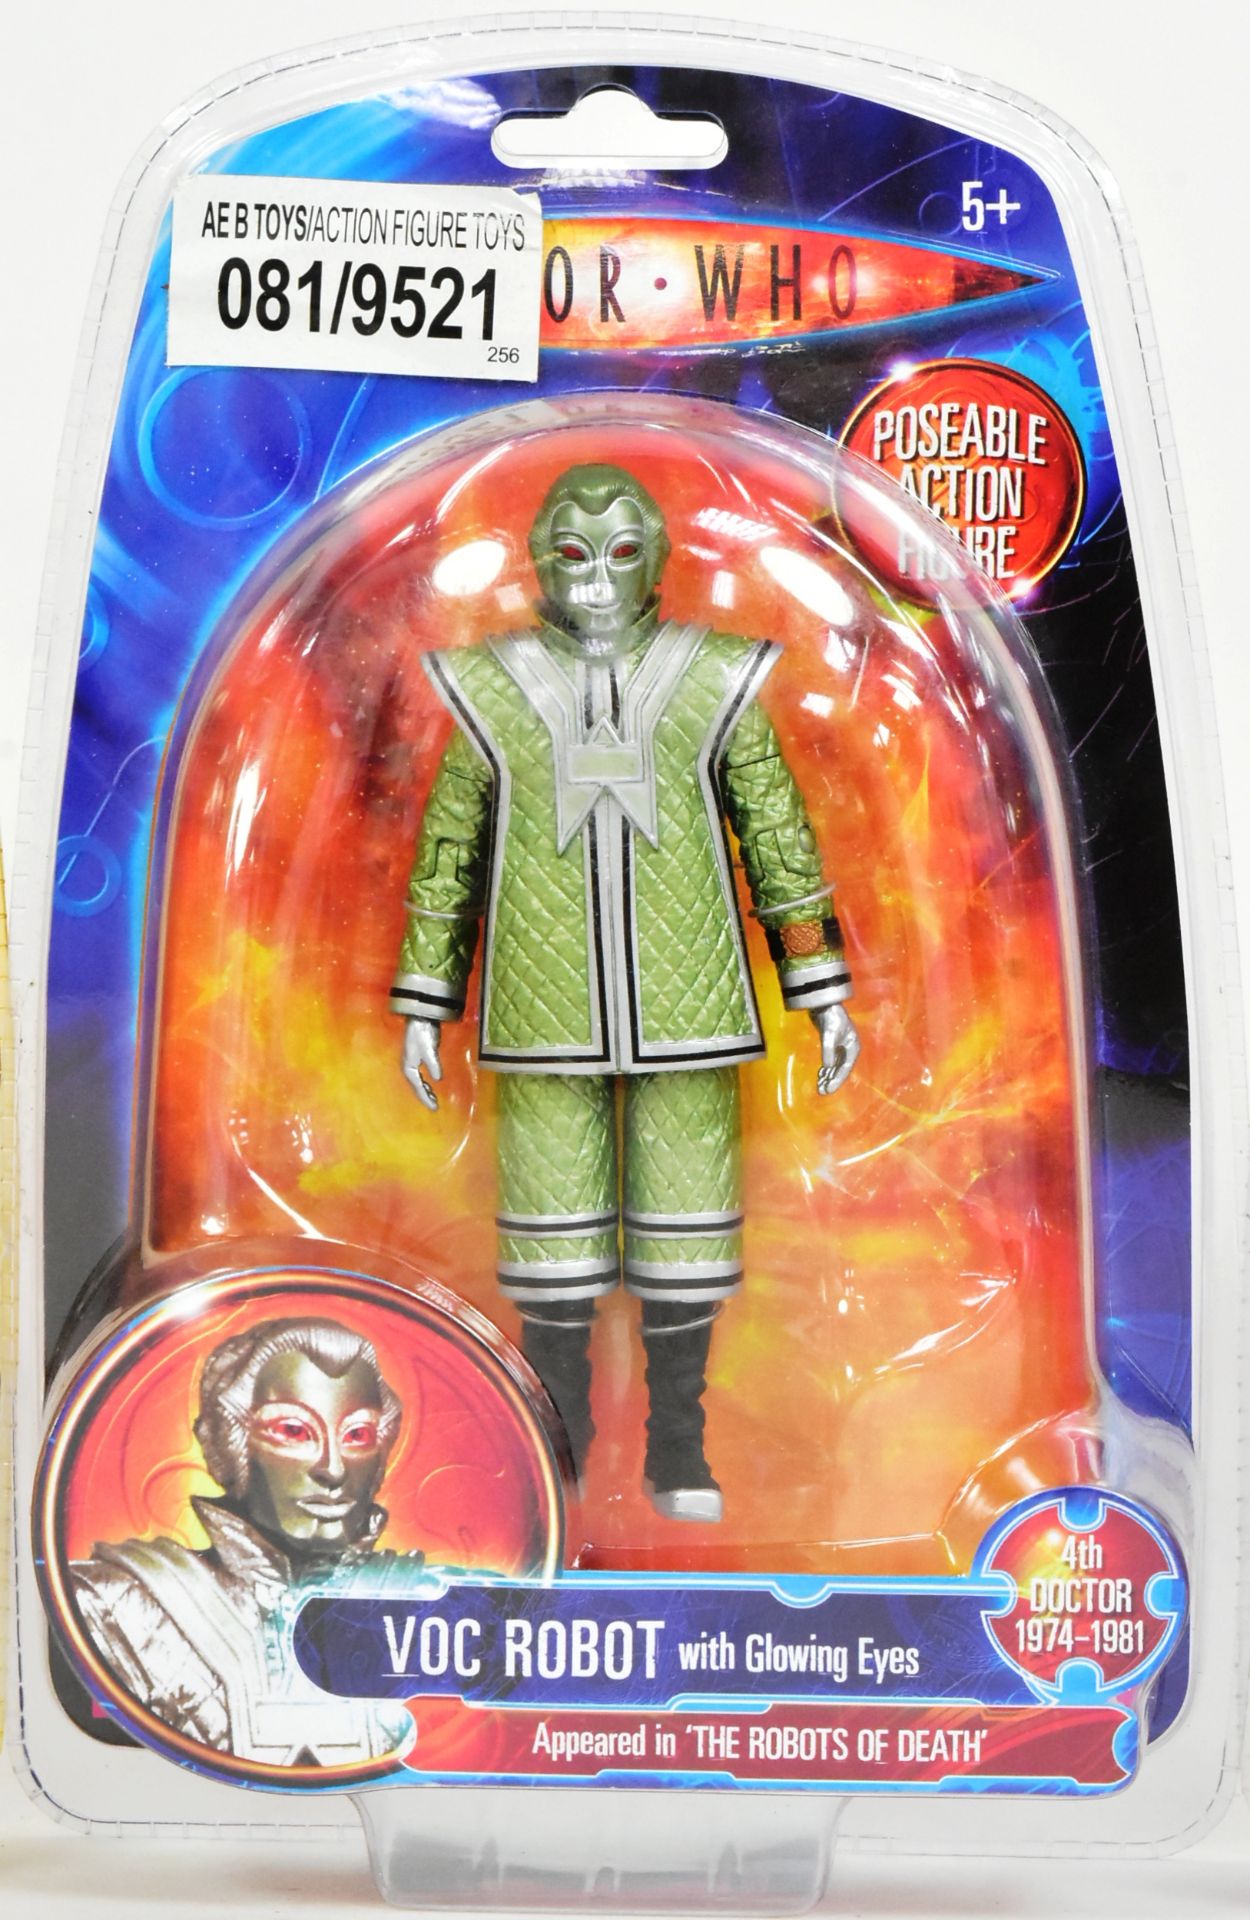 DOCTOR WHO - CHARACTER OPTIONS - VOC ROBOT ACTION FIGURES - Image 4 of 5